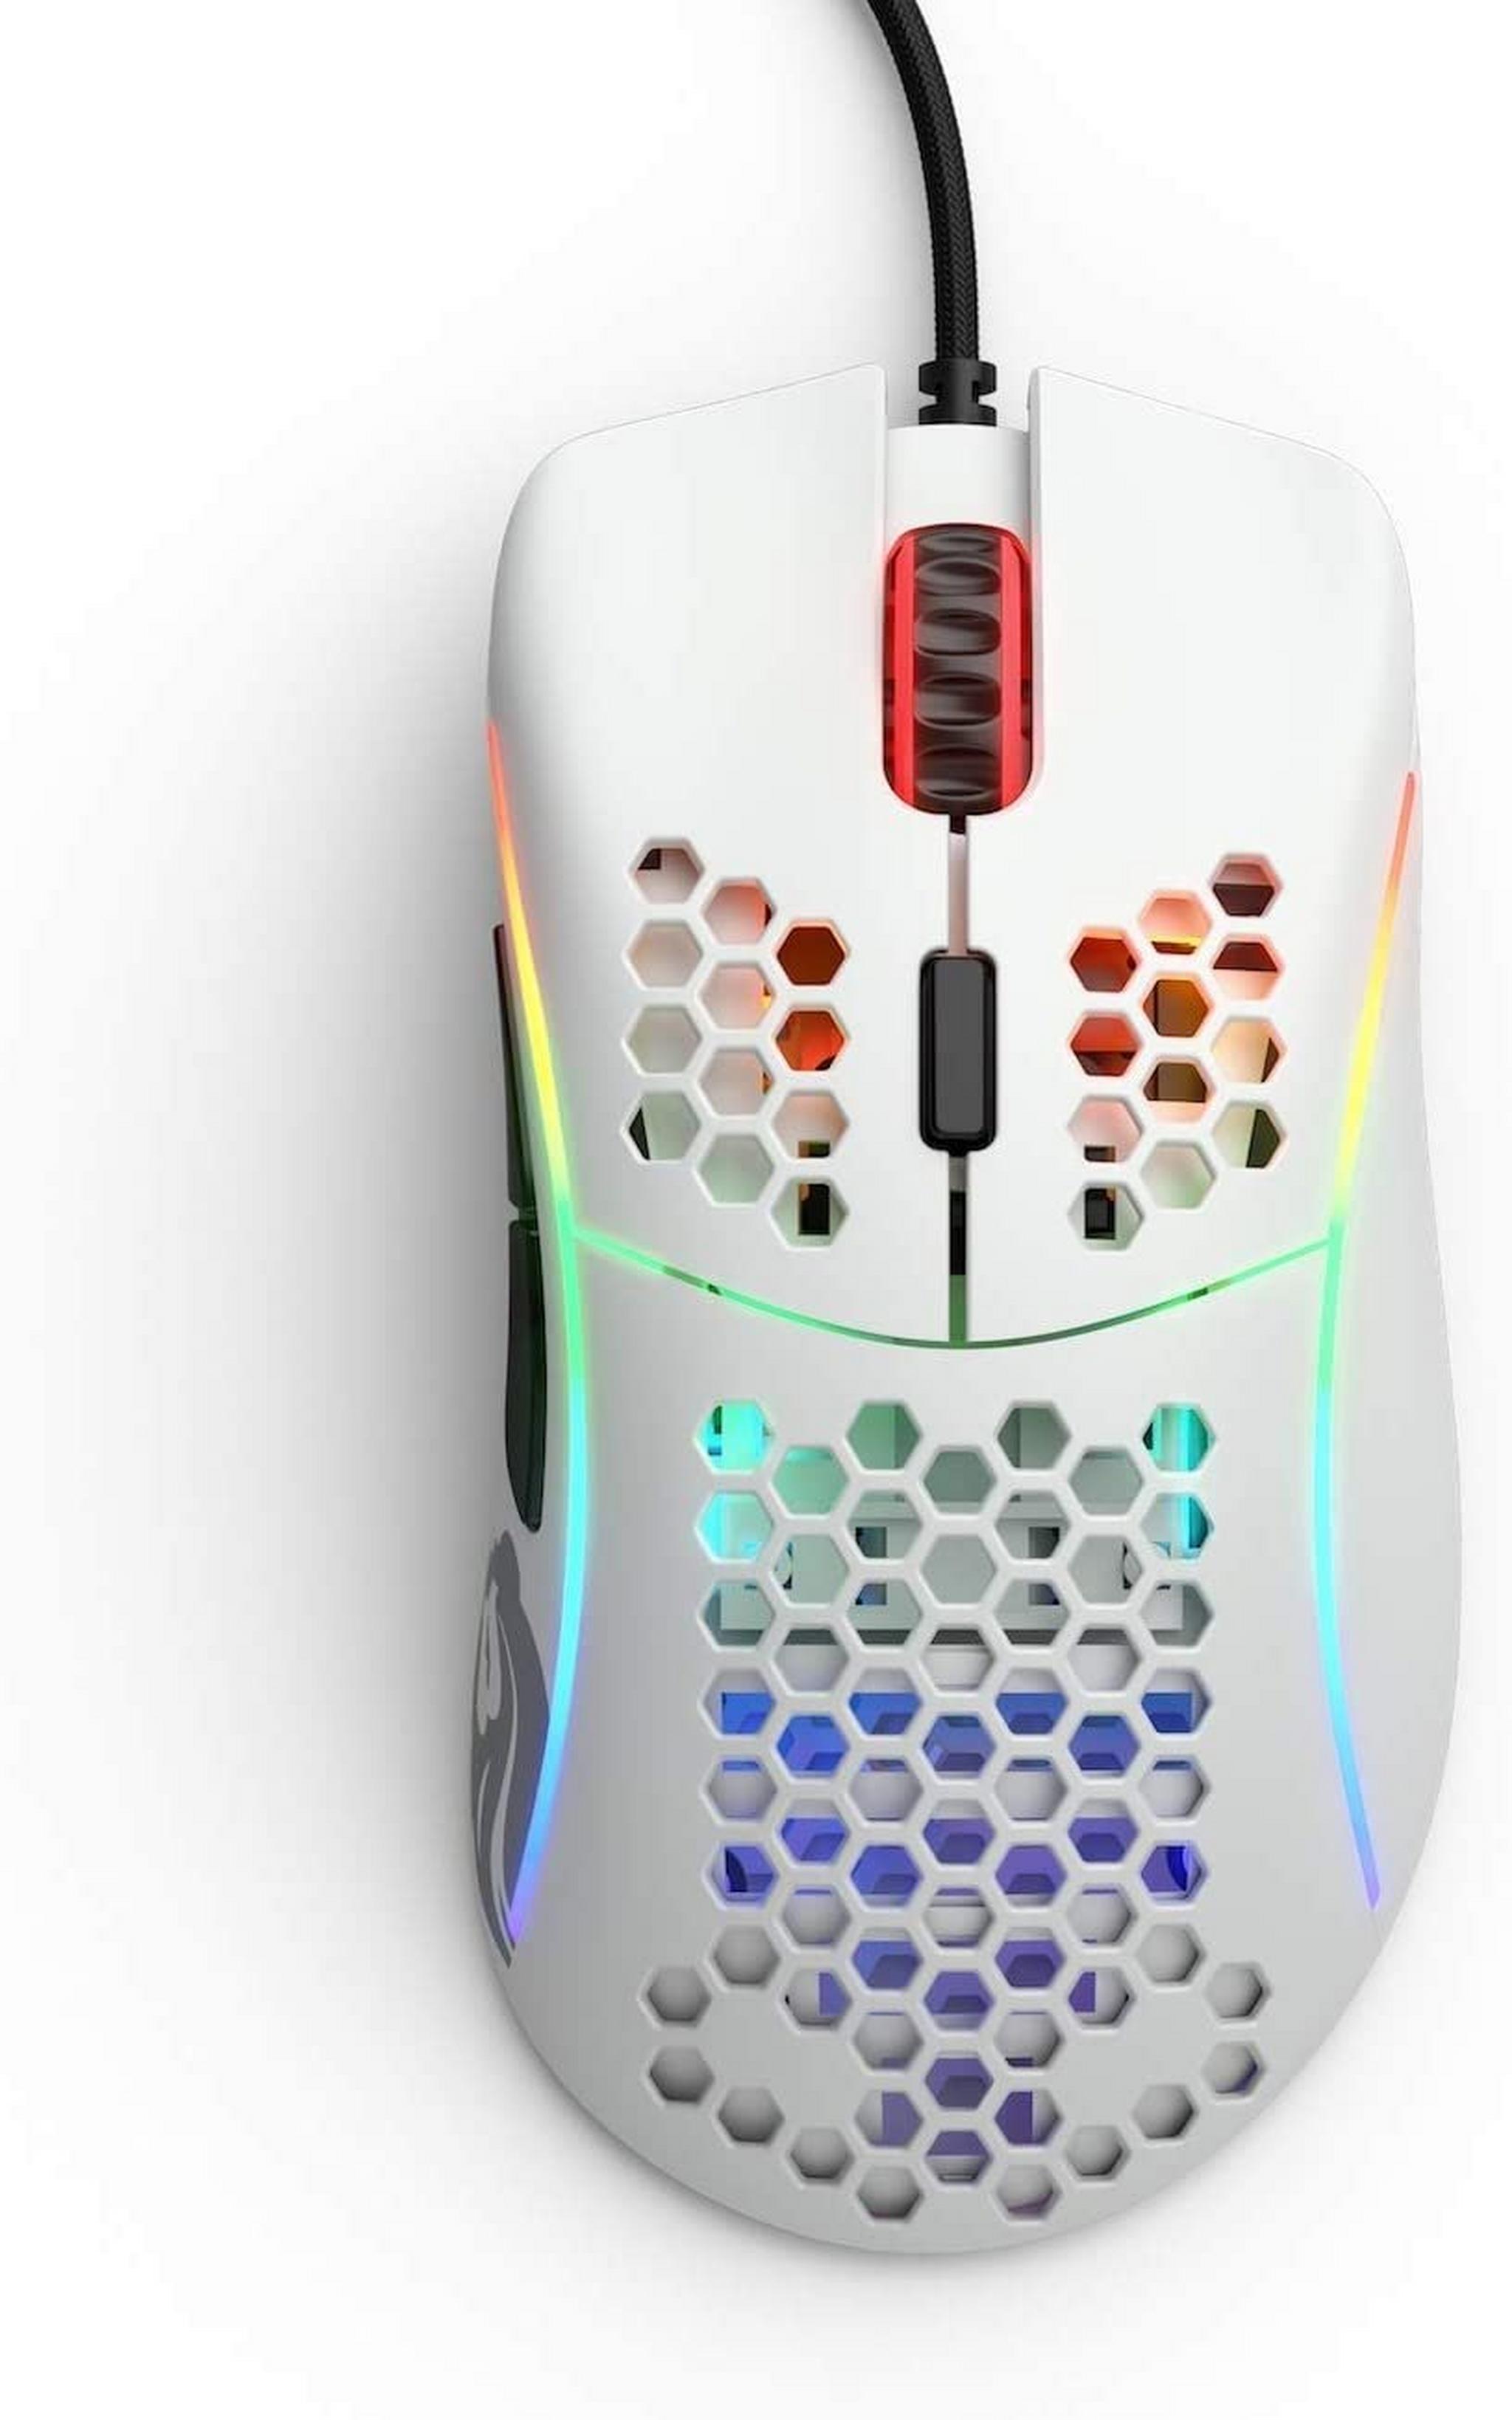 Glorious Gaming Mouse Model D - Matte White